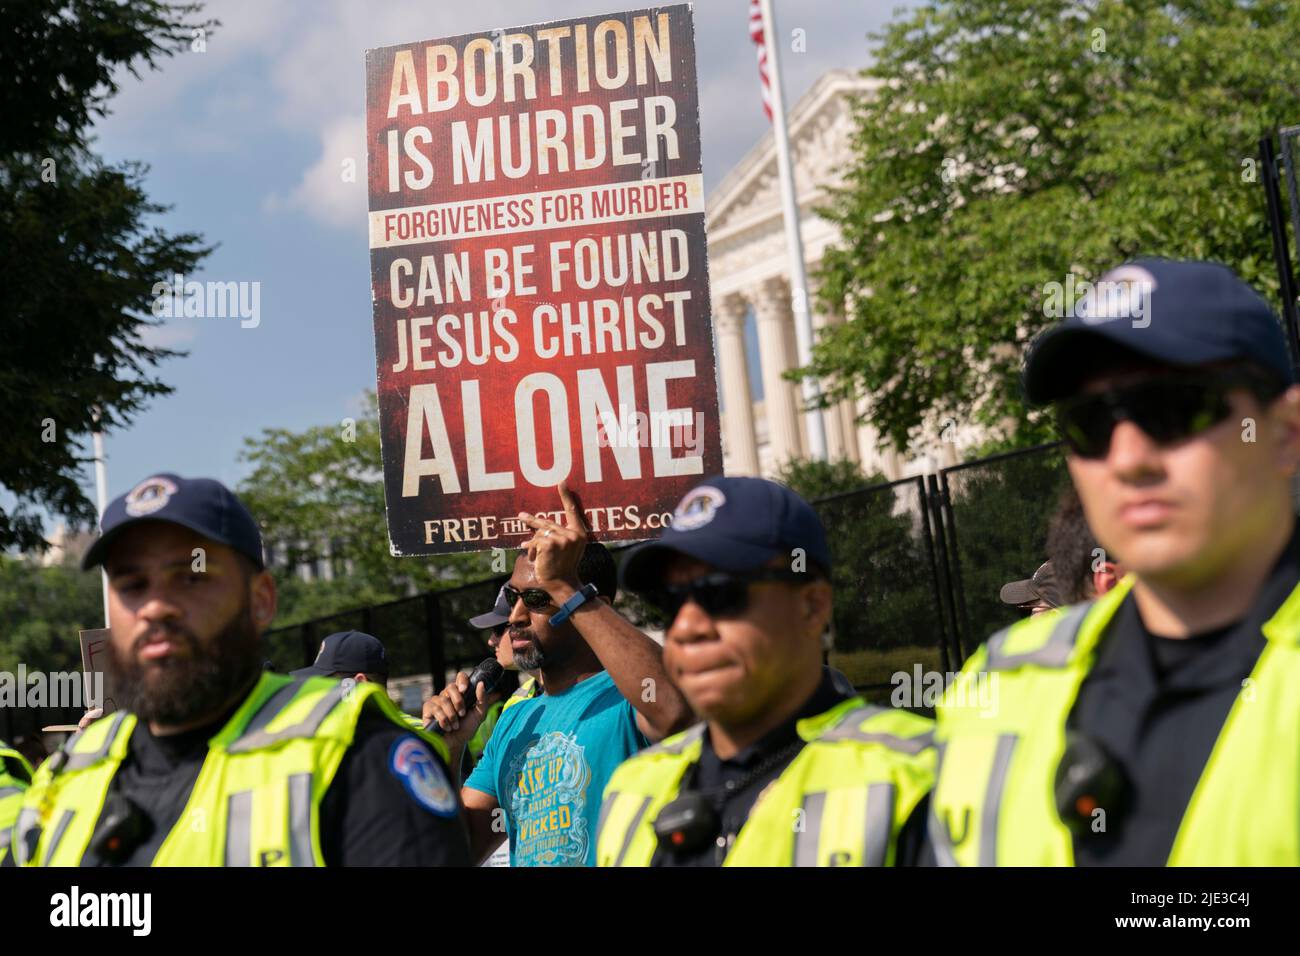 Washington, USA. 24th June, 2022. Police defend an anti-abortion demonstrator from protesters in opposition outside the Supreme Court in Washington, DC Friday, June 24, 2022. The Supreme Court overturned Roe v, Wade eliminating the right to abortion in the U.S. (Photo by Chris Kleponis/Sipa USA) Credit: Sipa USA/Alamy Live News Stock Photo